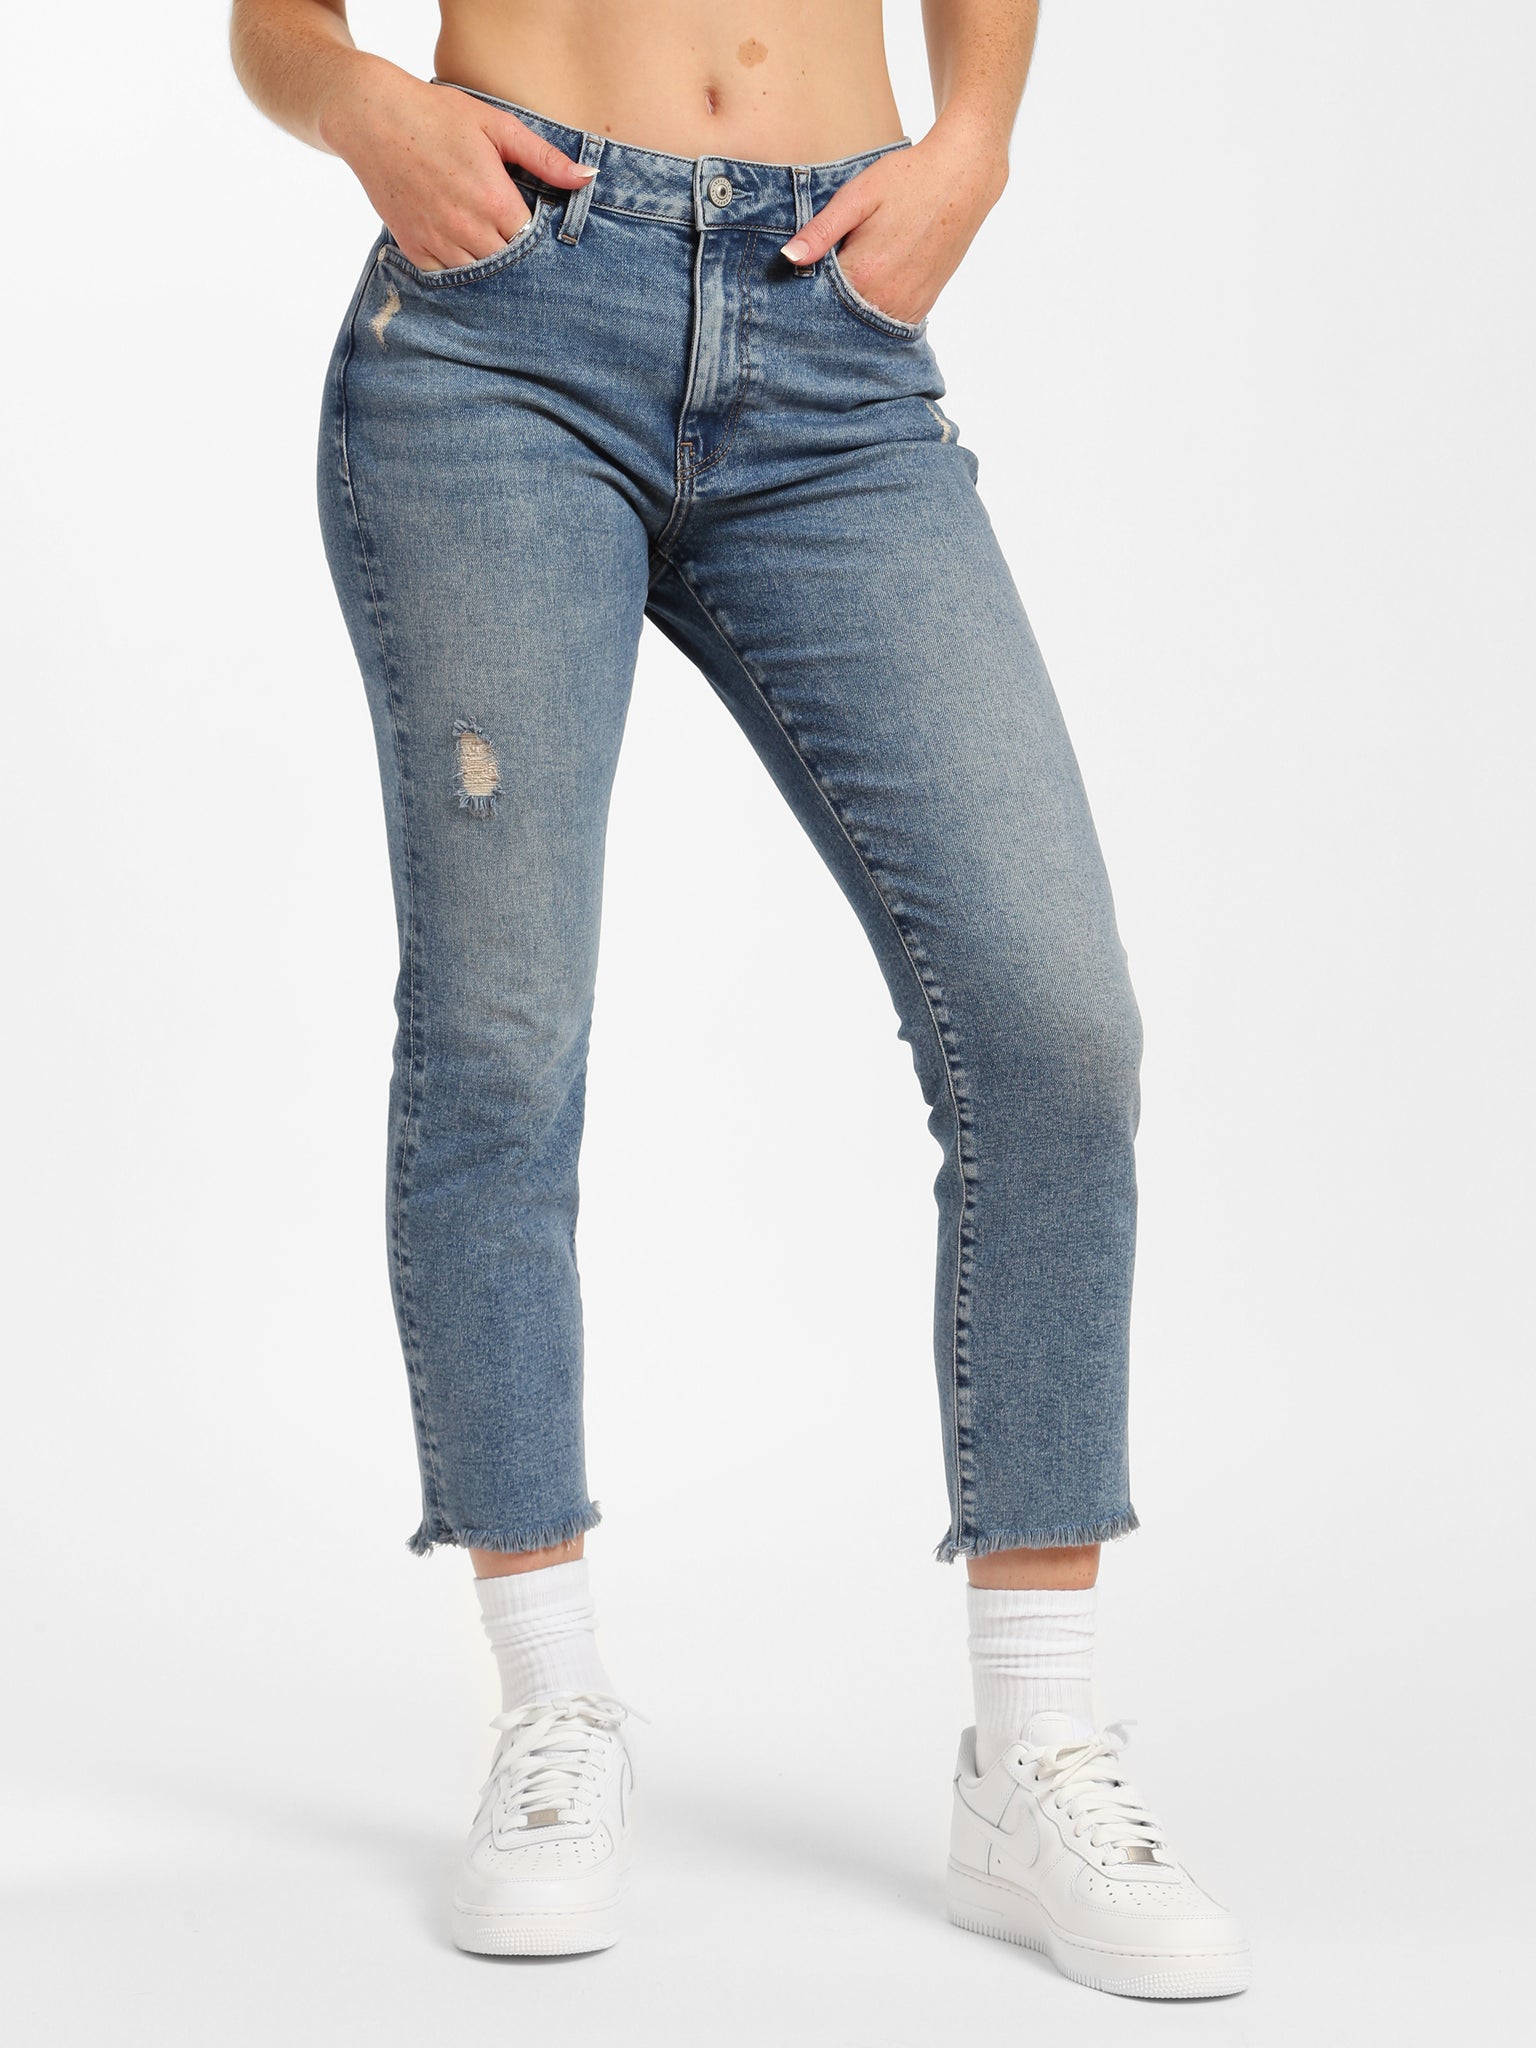 Levis 310 Shaping Super Skinny Ripped Women's Jeans Ontario Spirit